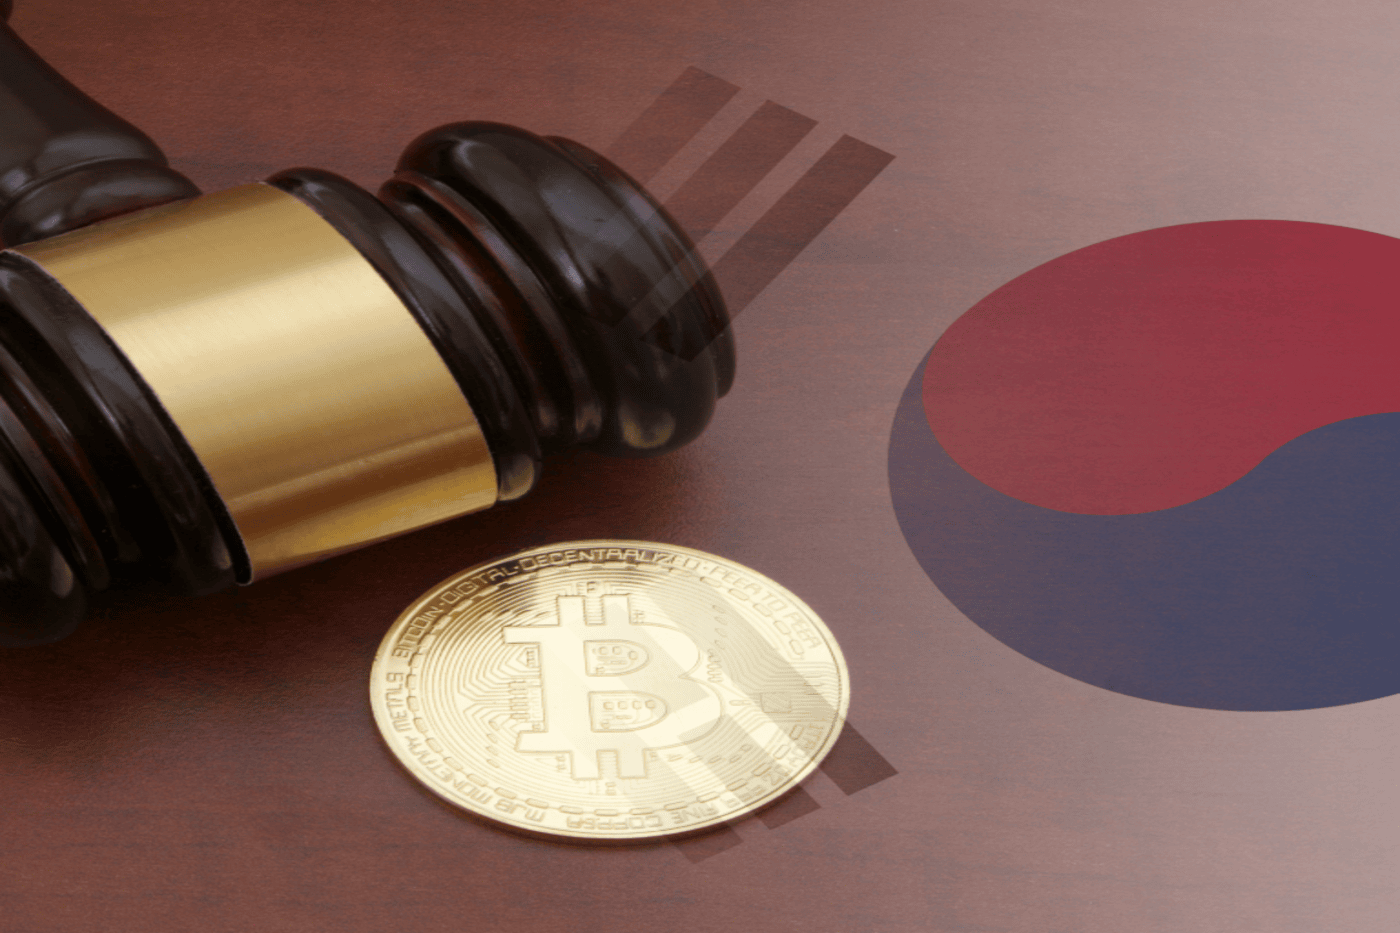 South Korea To Reveal Top Public Officials’ Crypto Holdings Next Year